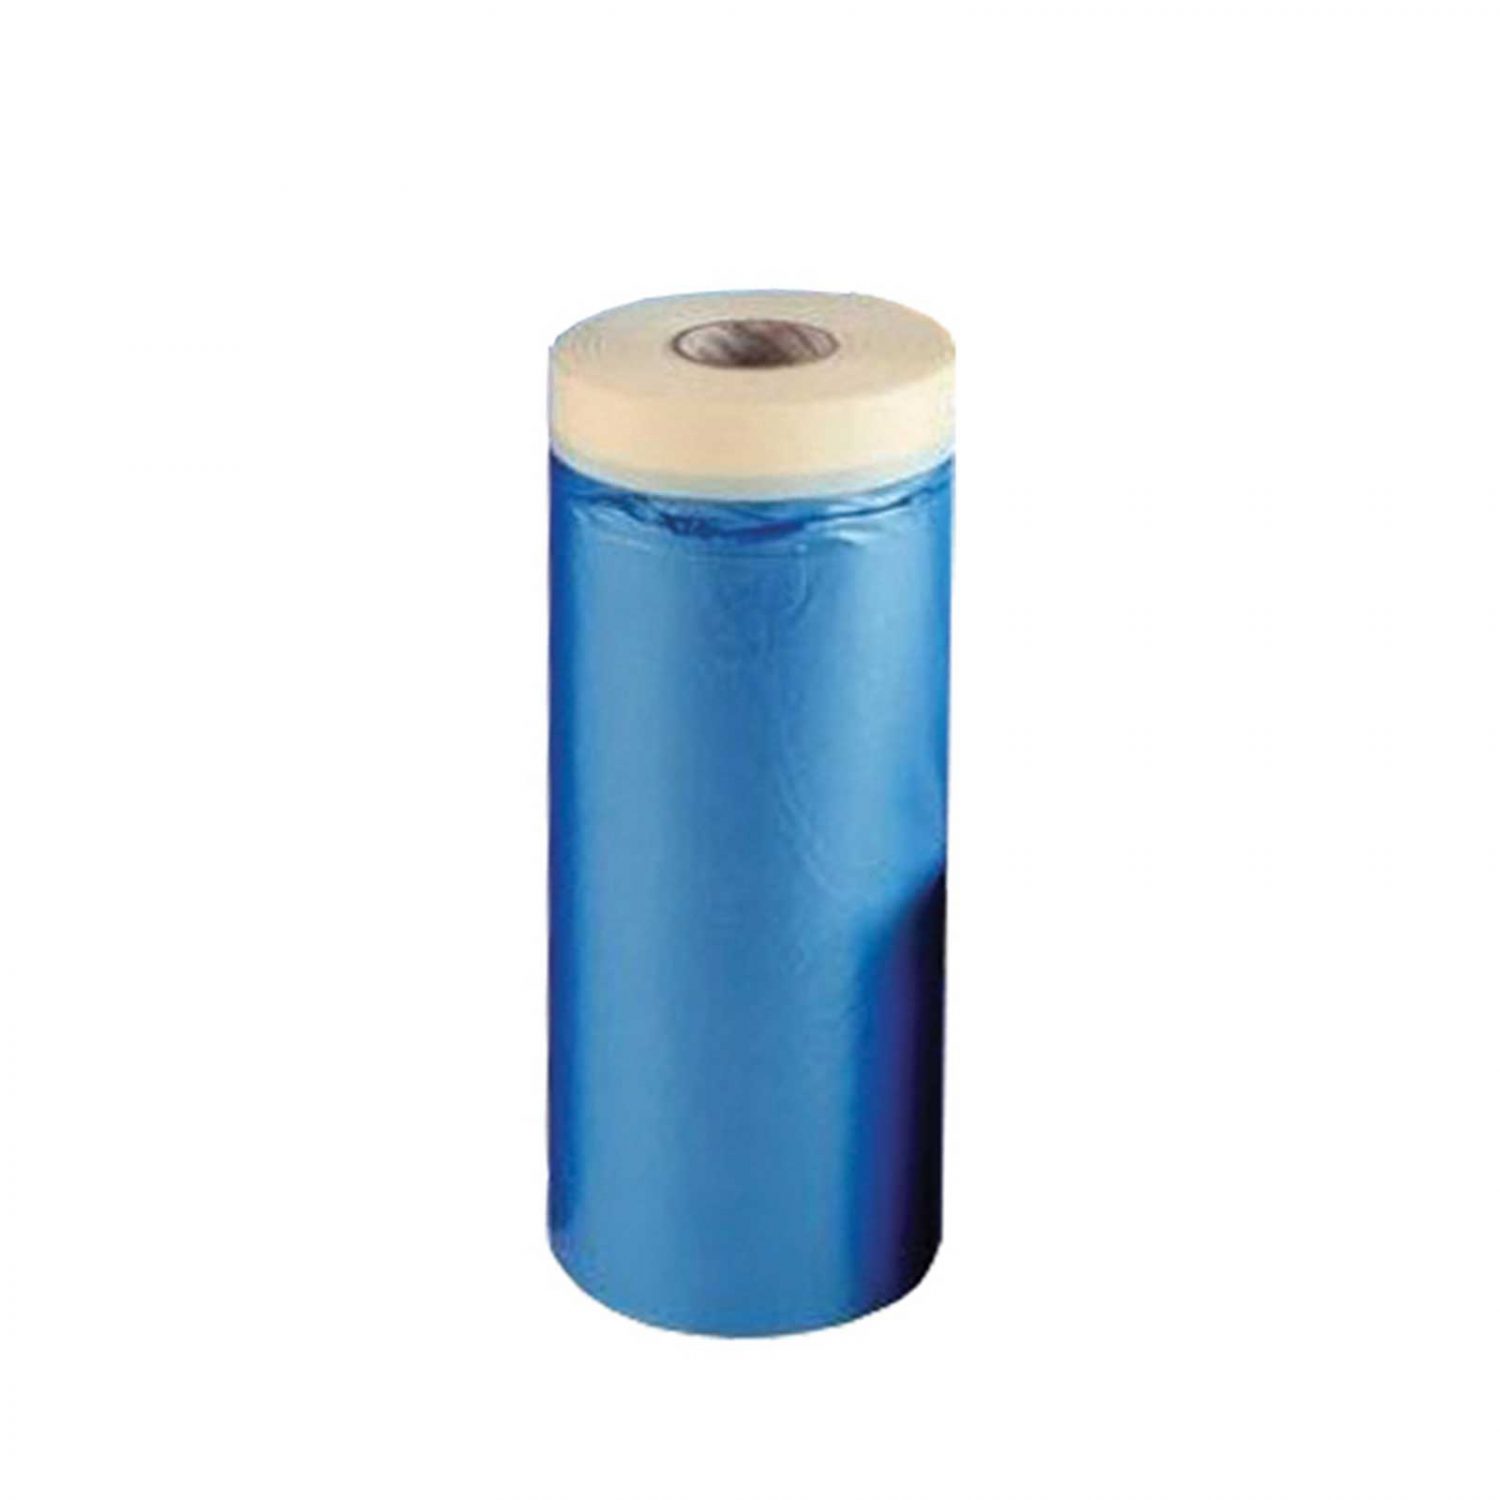 MASKING COVER ROLLS - Rustbuster